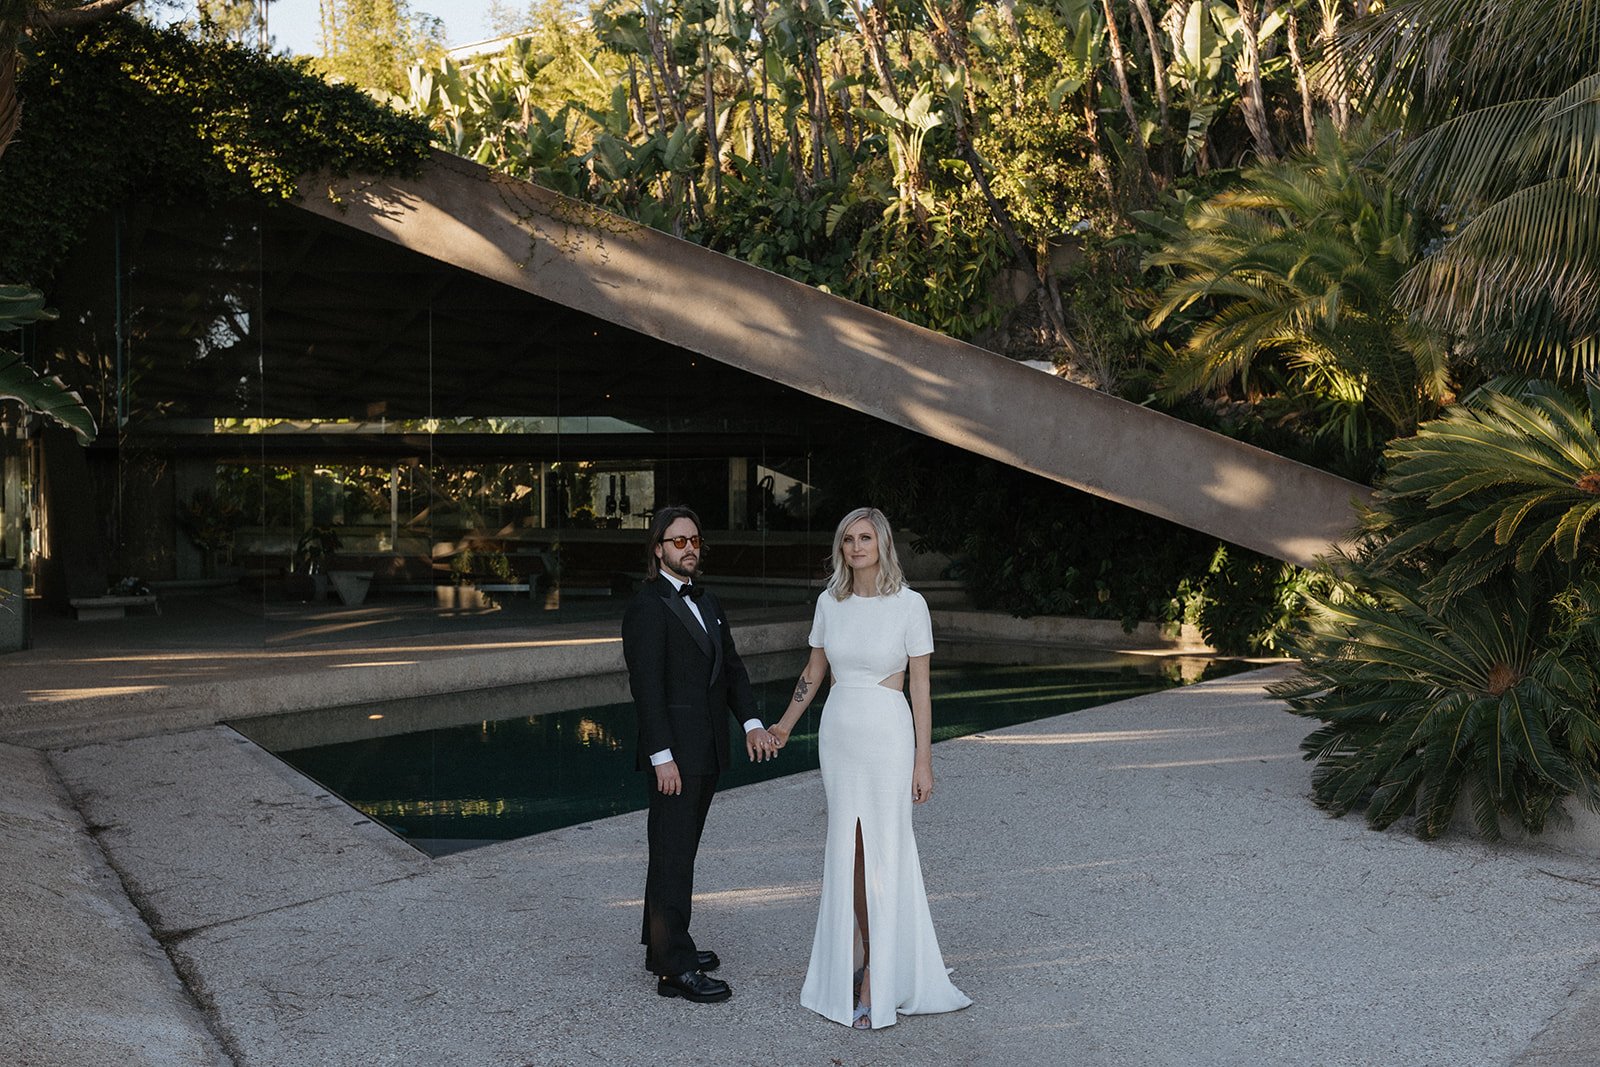 the Sheats–Goldstein Residence is a gorgeous spot for this couple's dream elopement ceremony